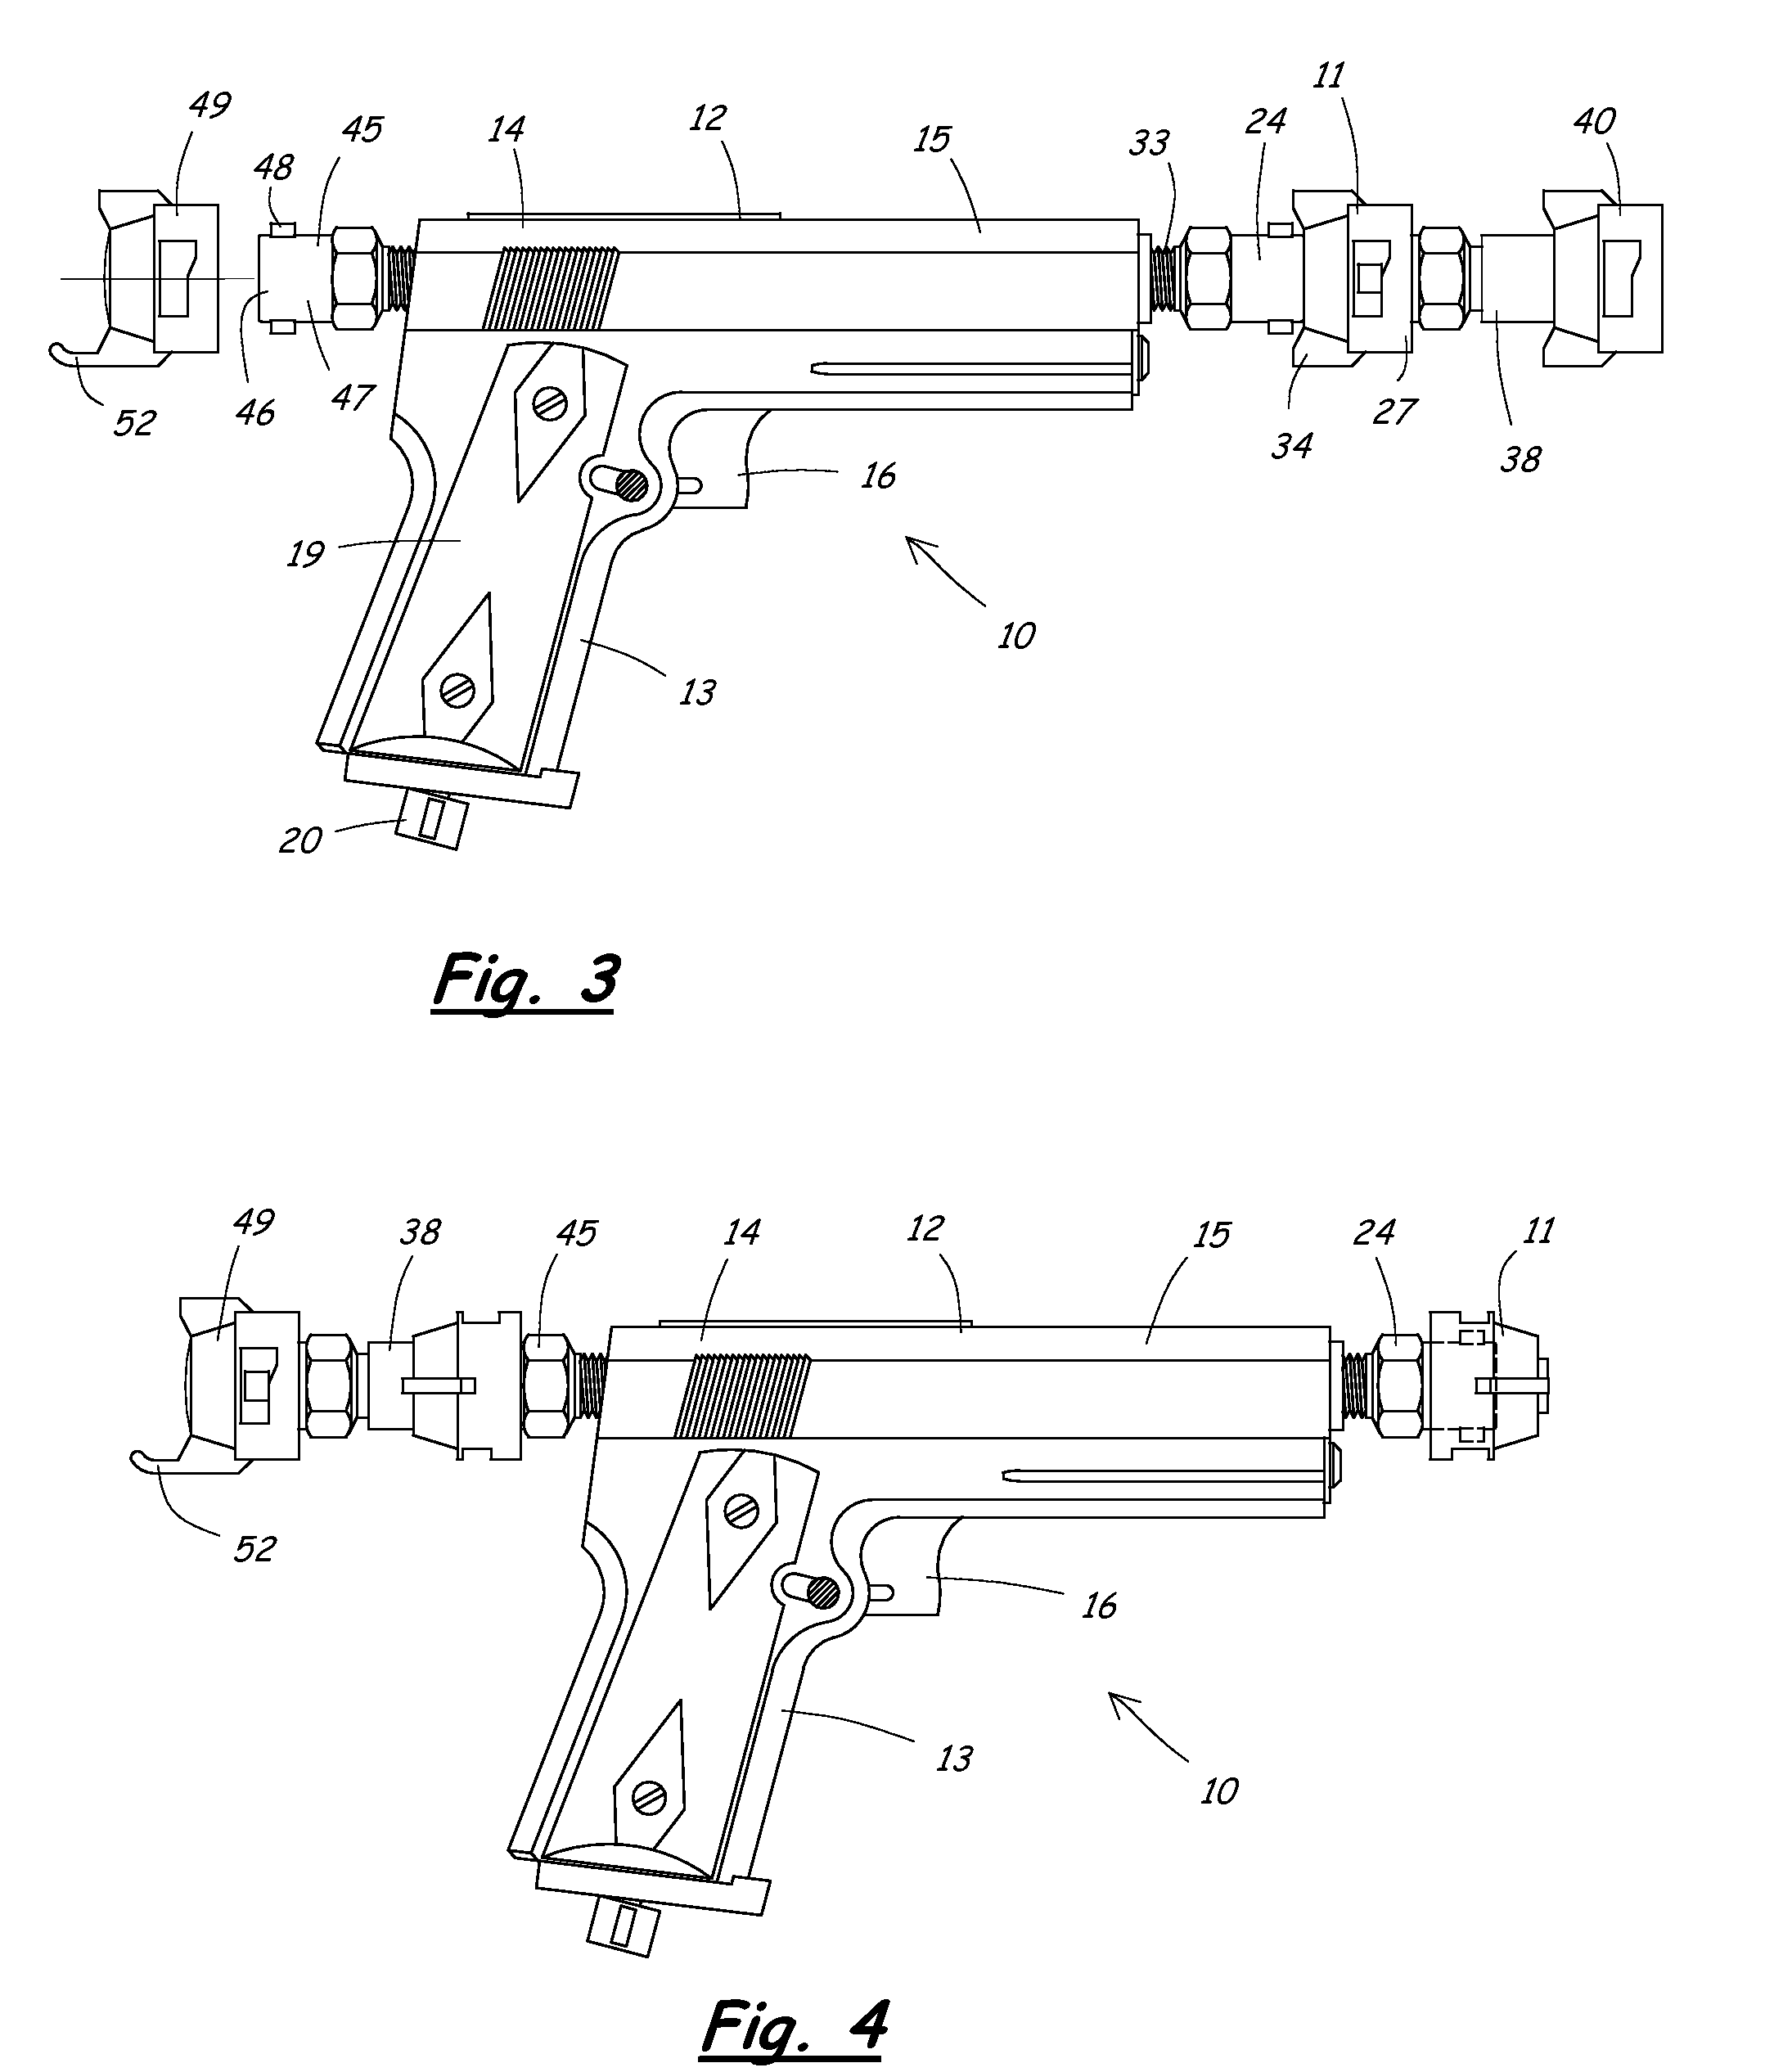 Handheld device and method for clearing obstructions from spray nozzles